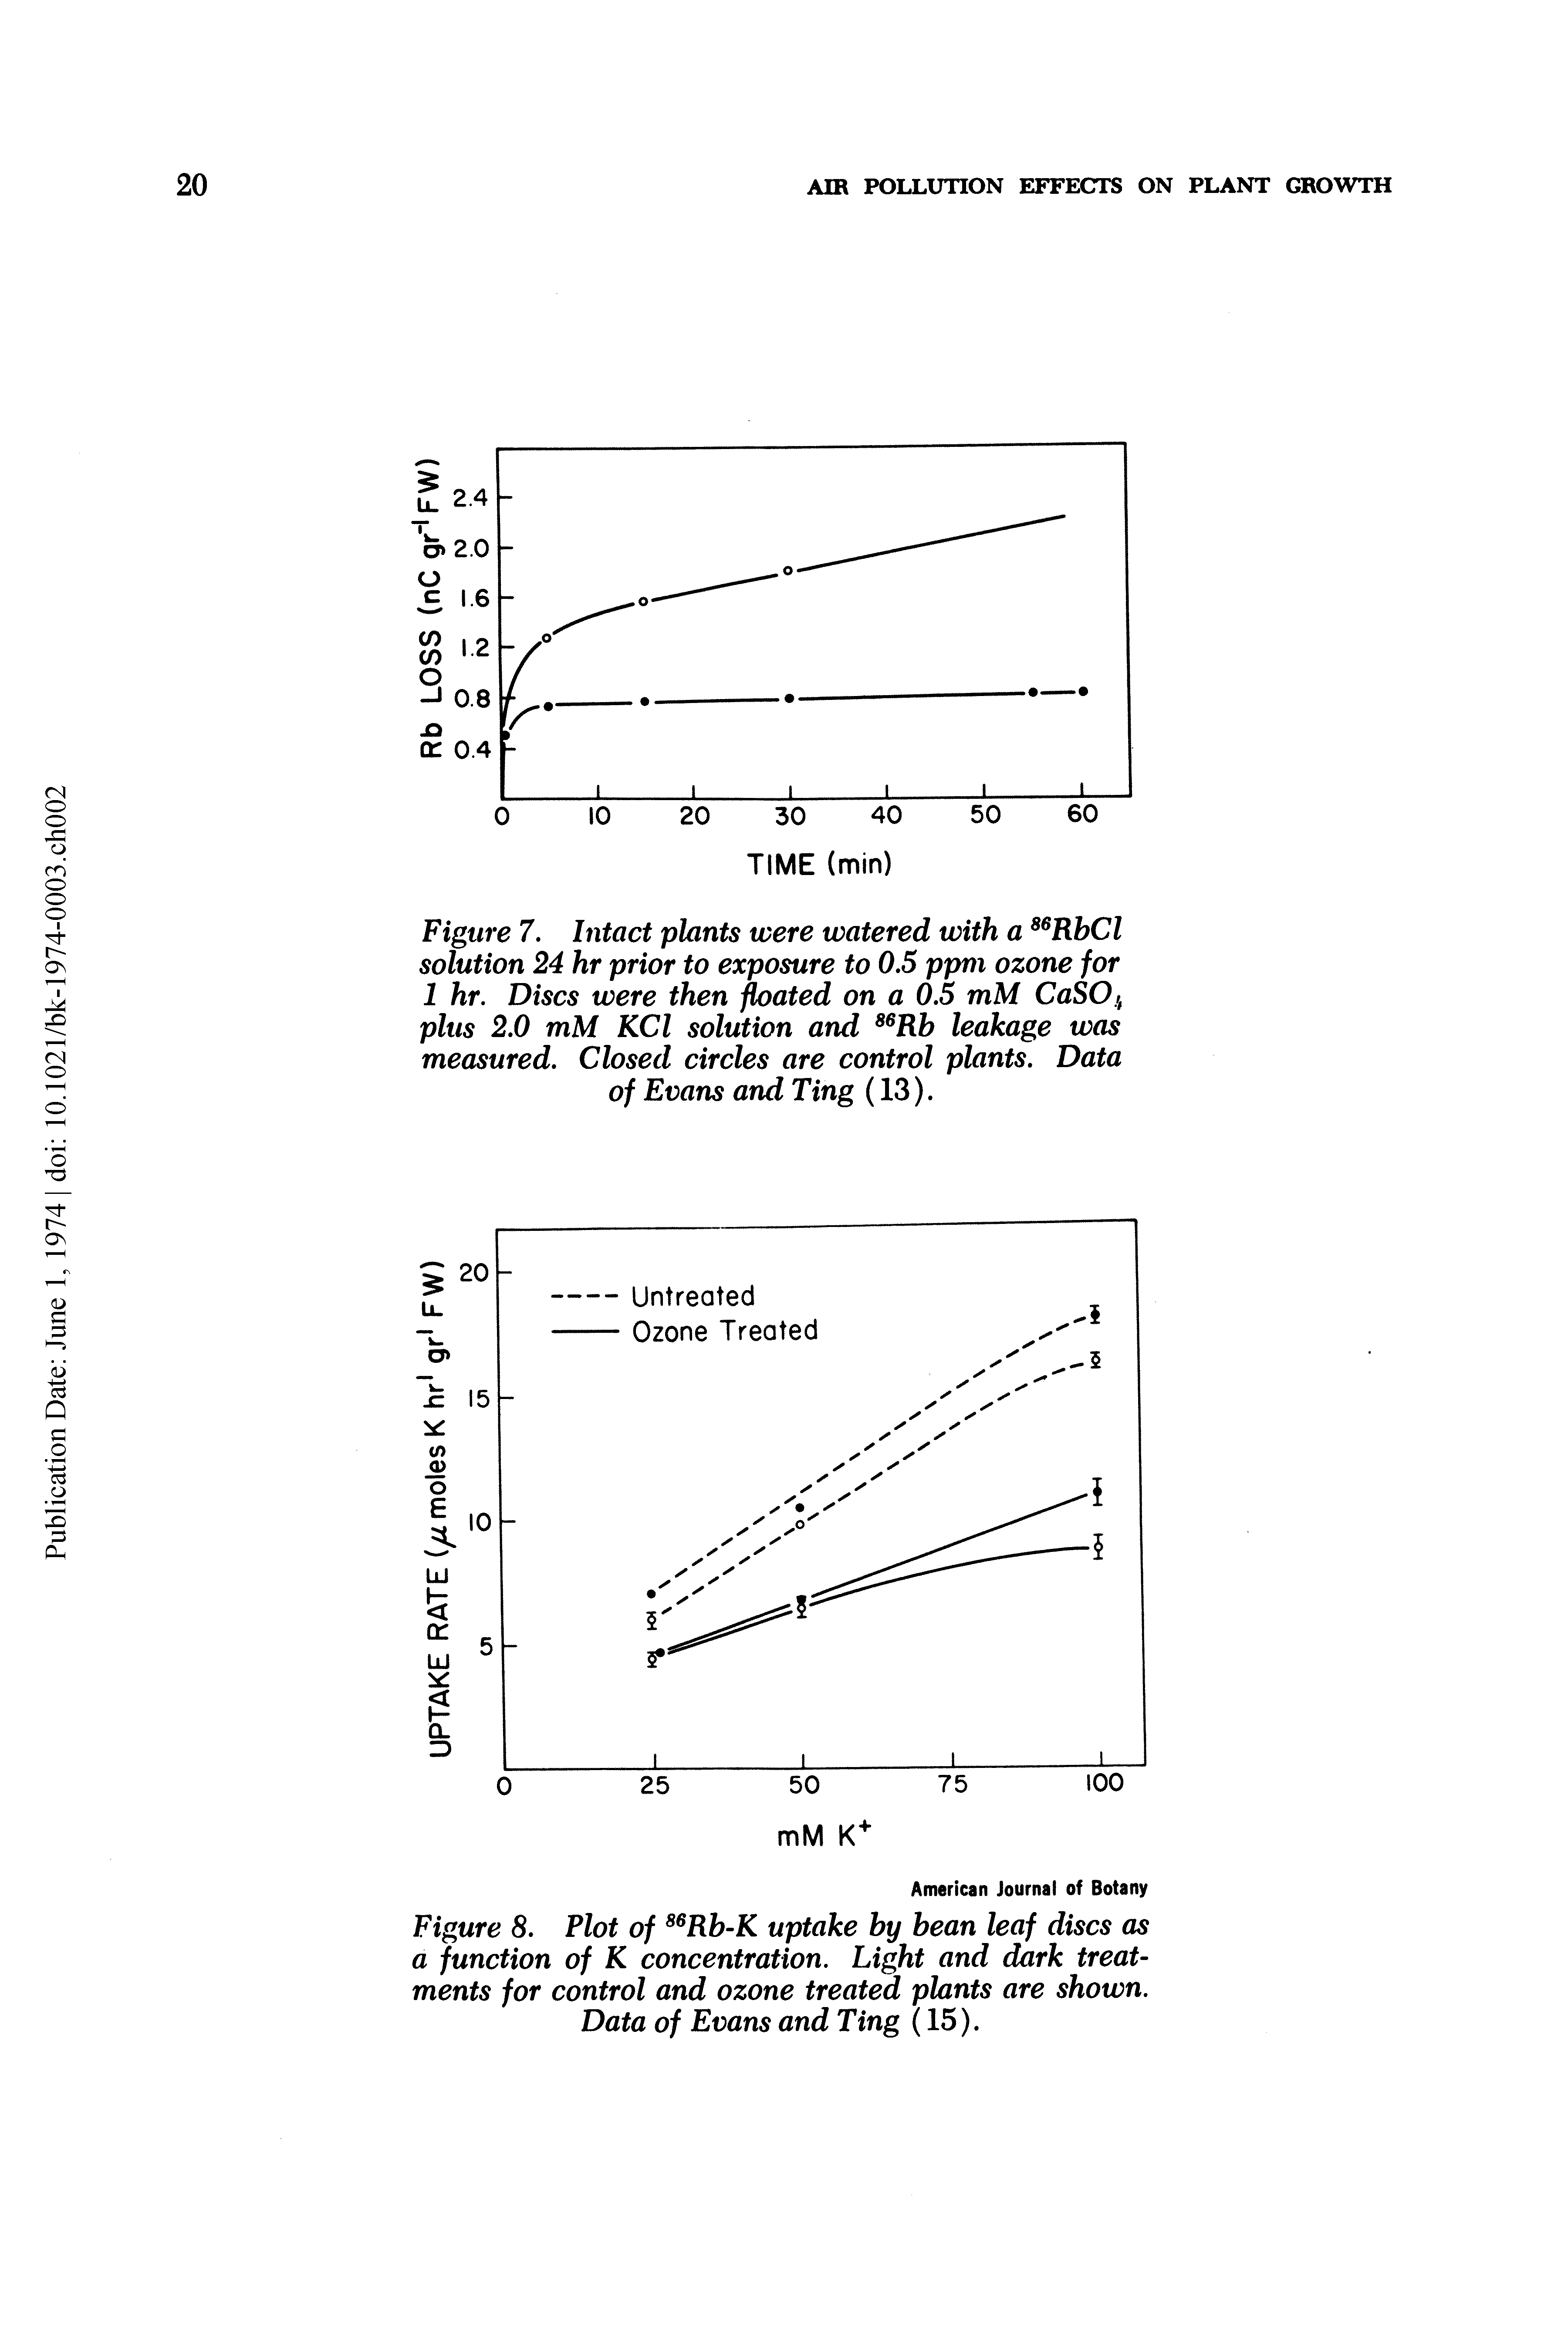 Figure 8. Plot of Rb-K uptake by bean leaf discs as a function of K concentration. Light and dark treatments for control and ozone treated plants are shown. Data of Evans and Ting (15).